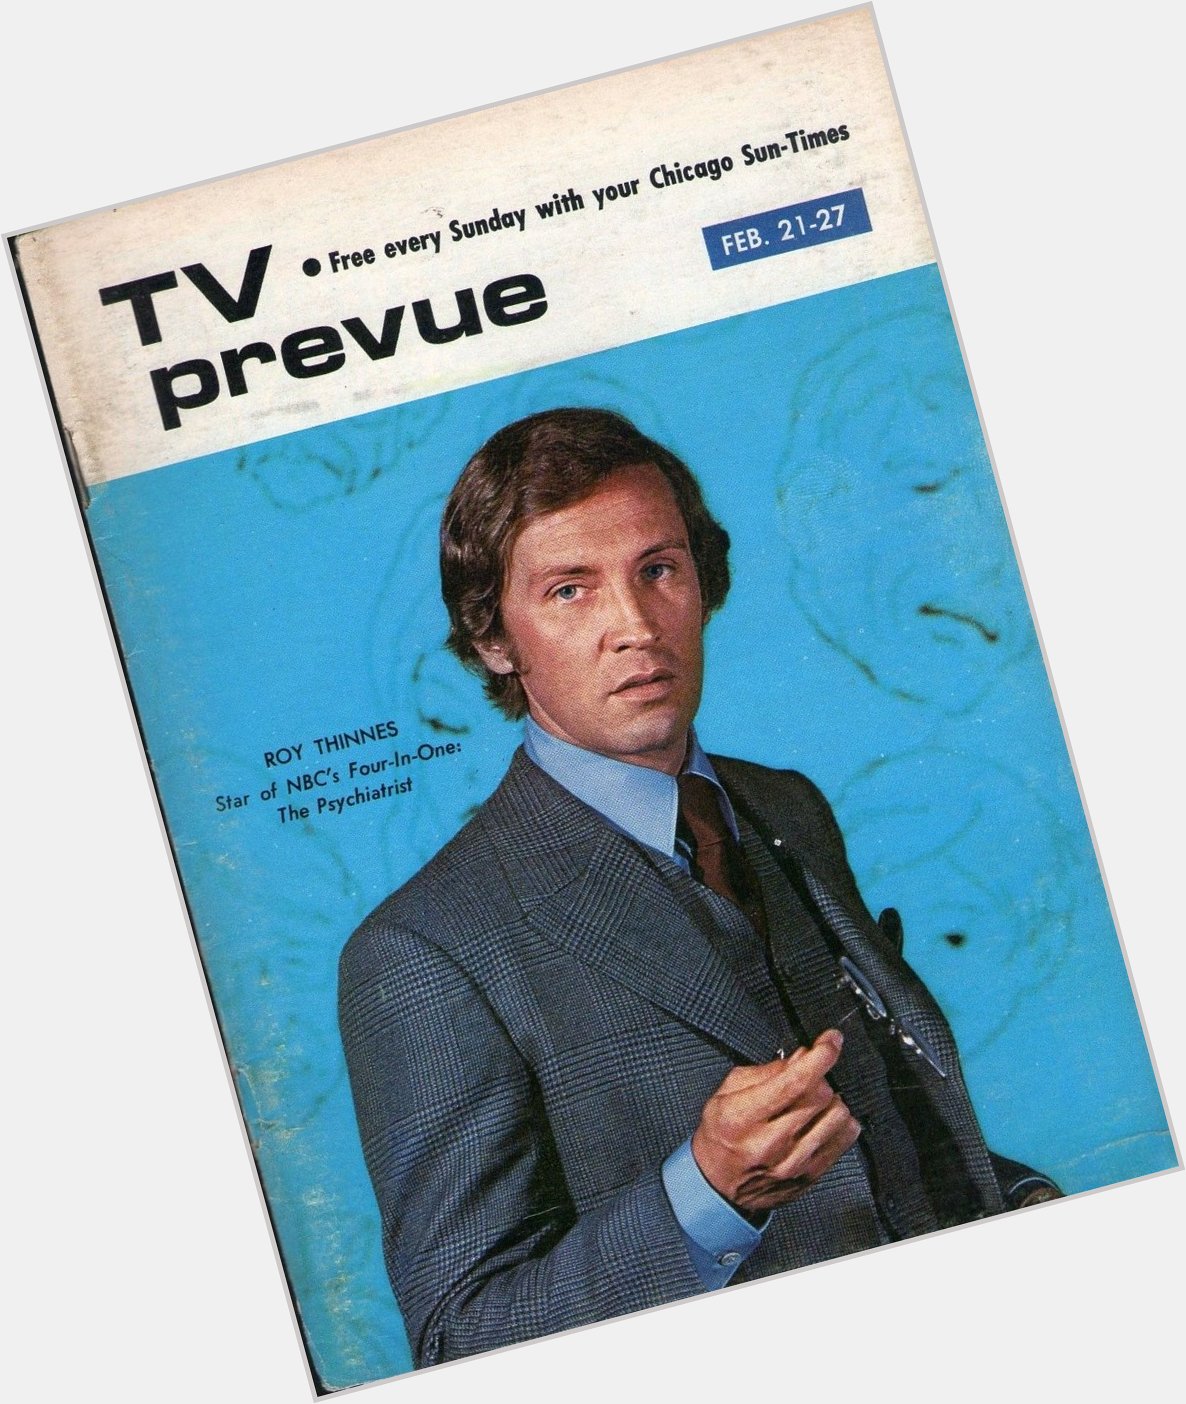 Happy Birthday to Chicago\s own Roy Thinnes (b. 1938)
Chicago Sun-Times TV Prevue.  February 21-27, 1971 